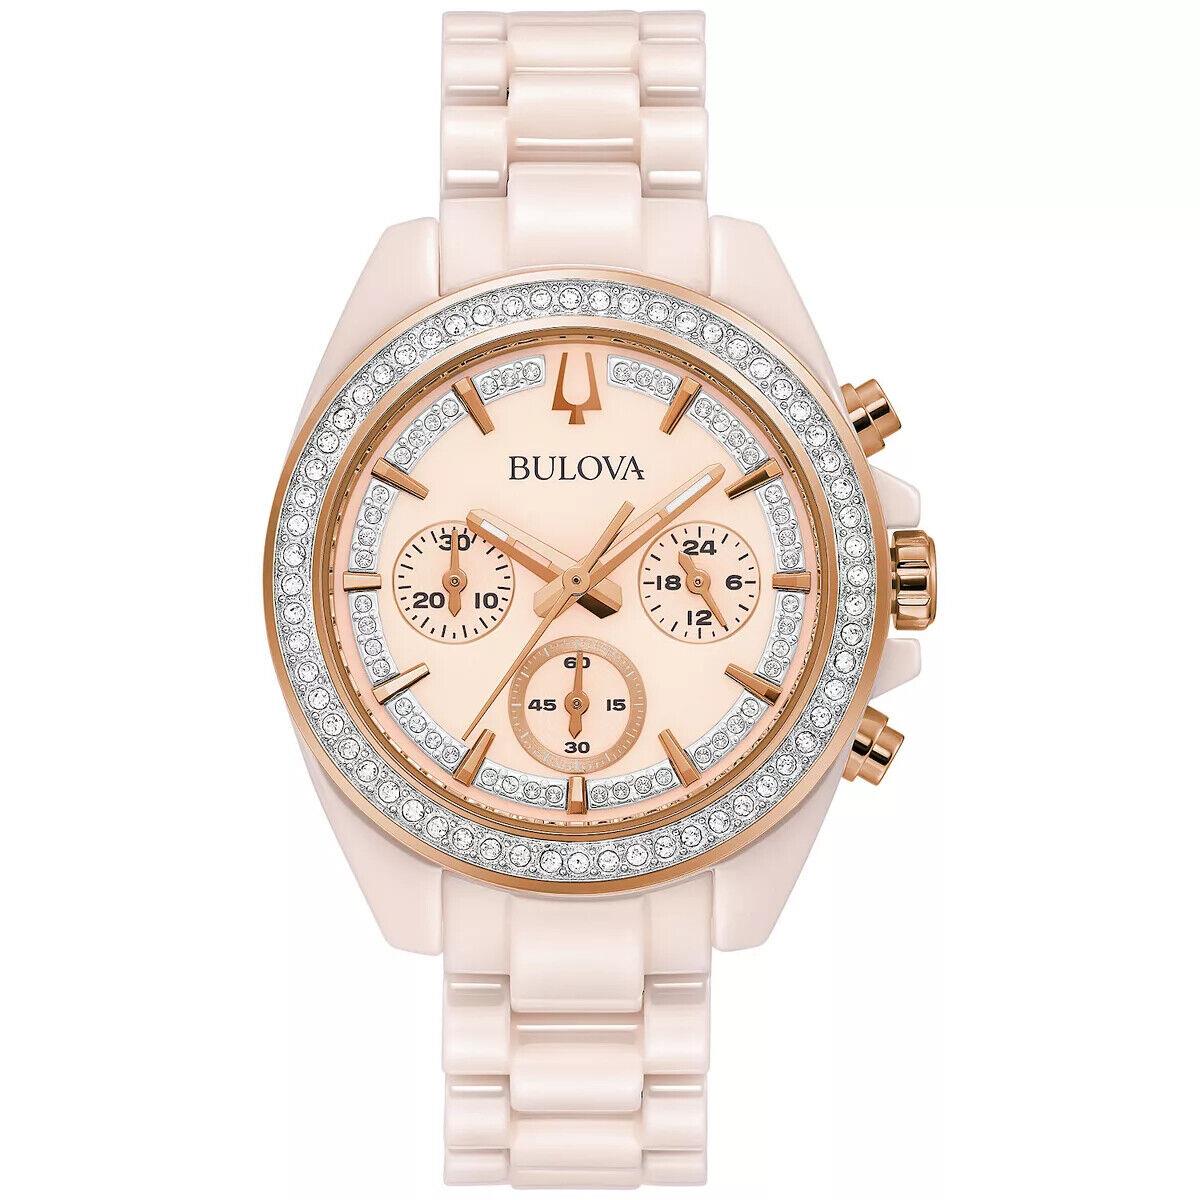 Bulova 98L282 Crystal Accented Chronograph Pink Ceramic Women`s Watch